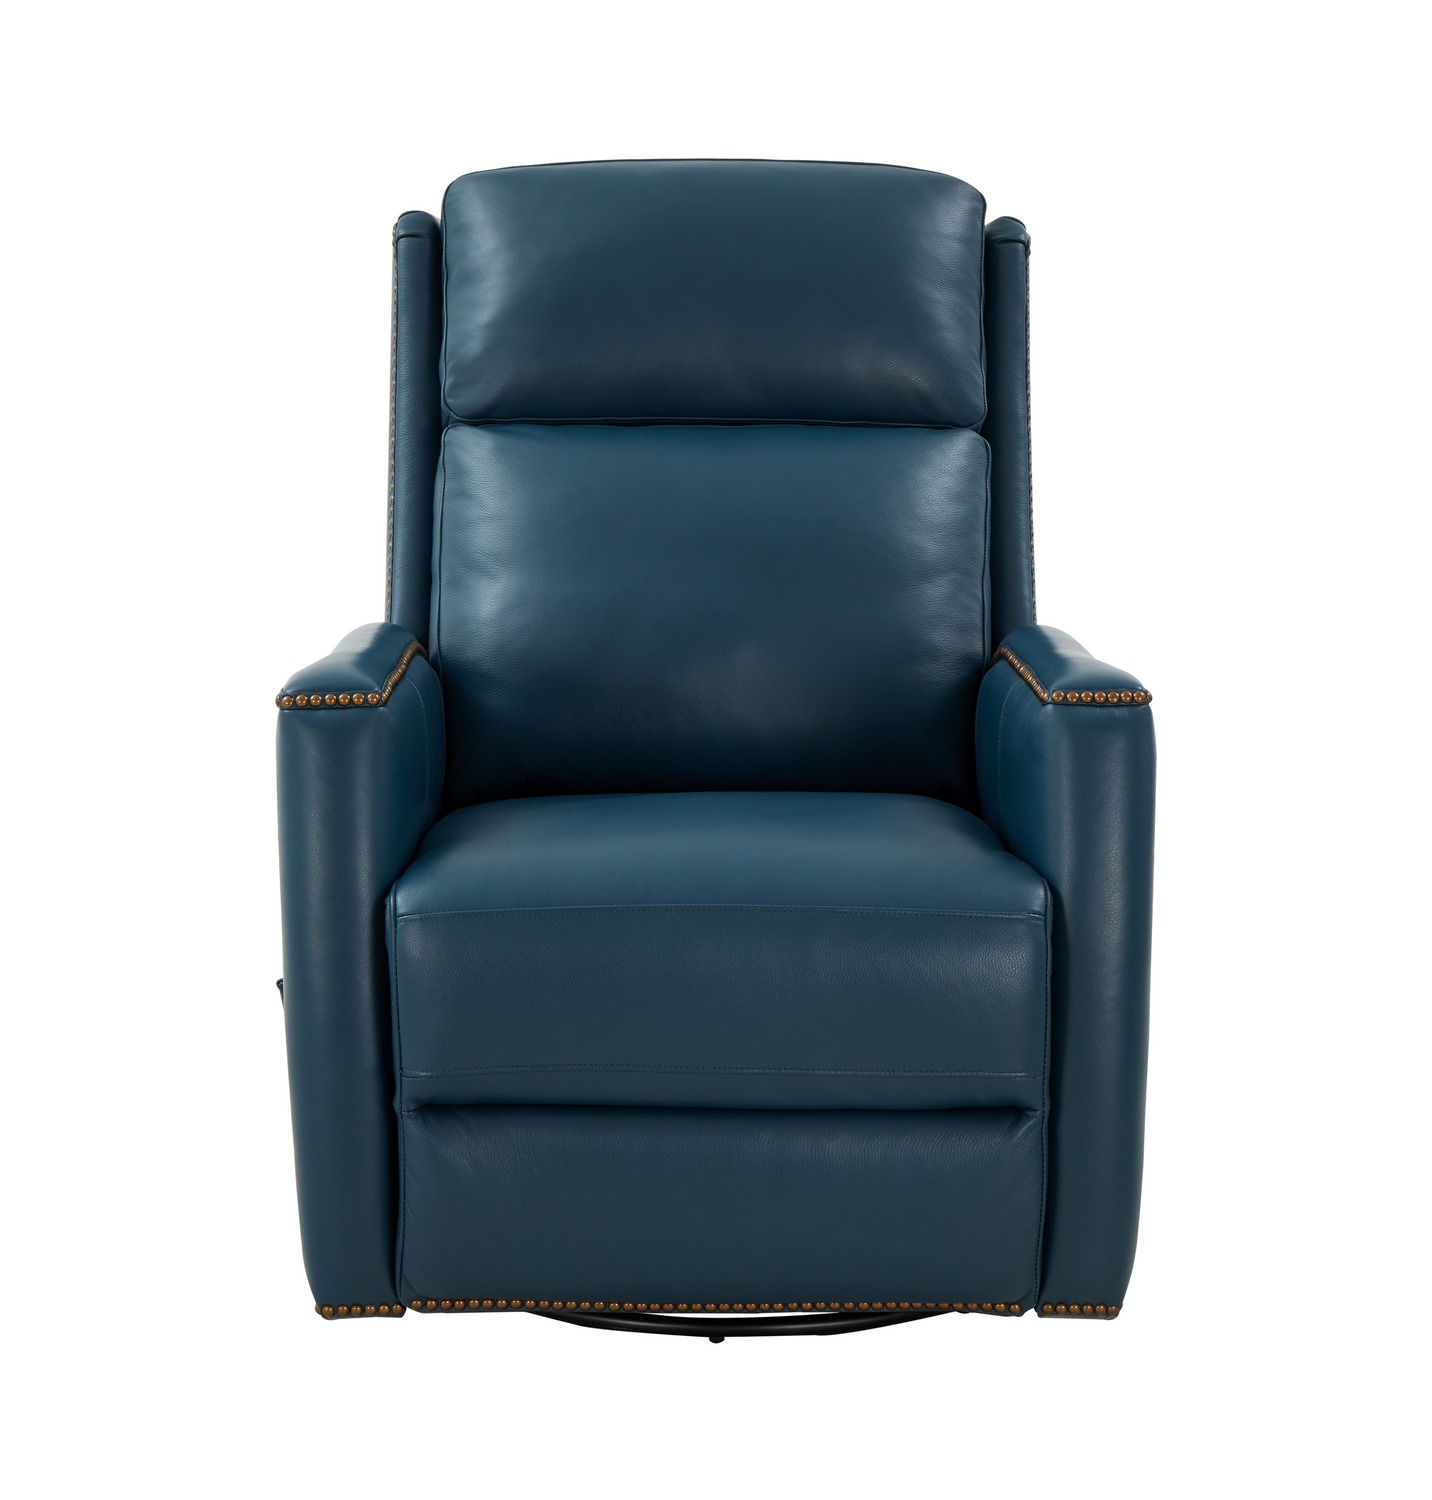 Barcalounger Brandt Swivel Glider Recliner Chair - Prestin Yale Blue/All Leather